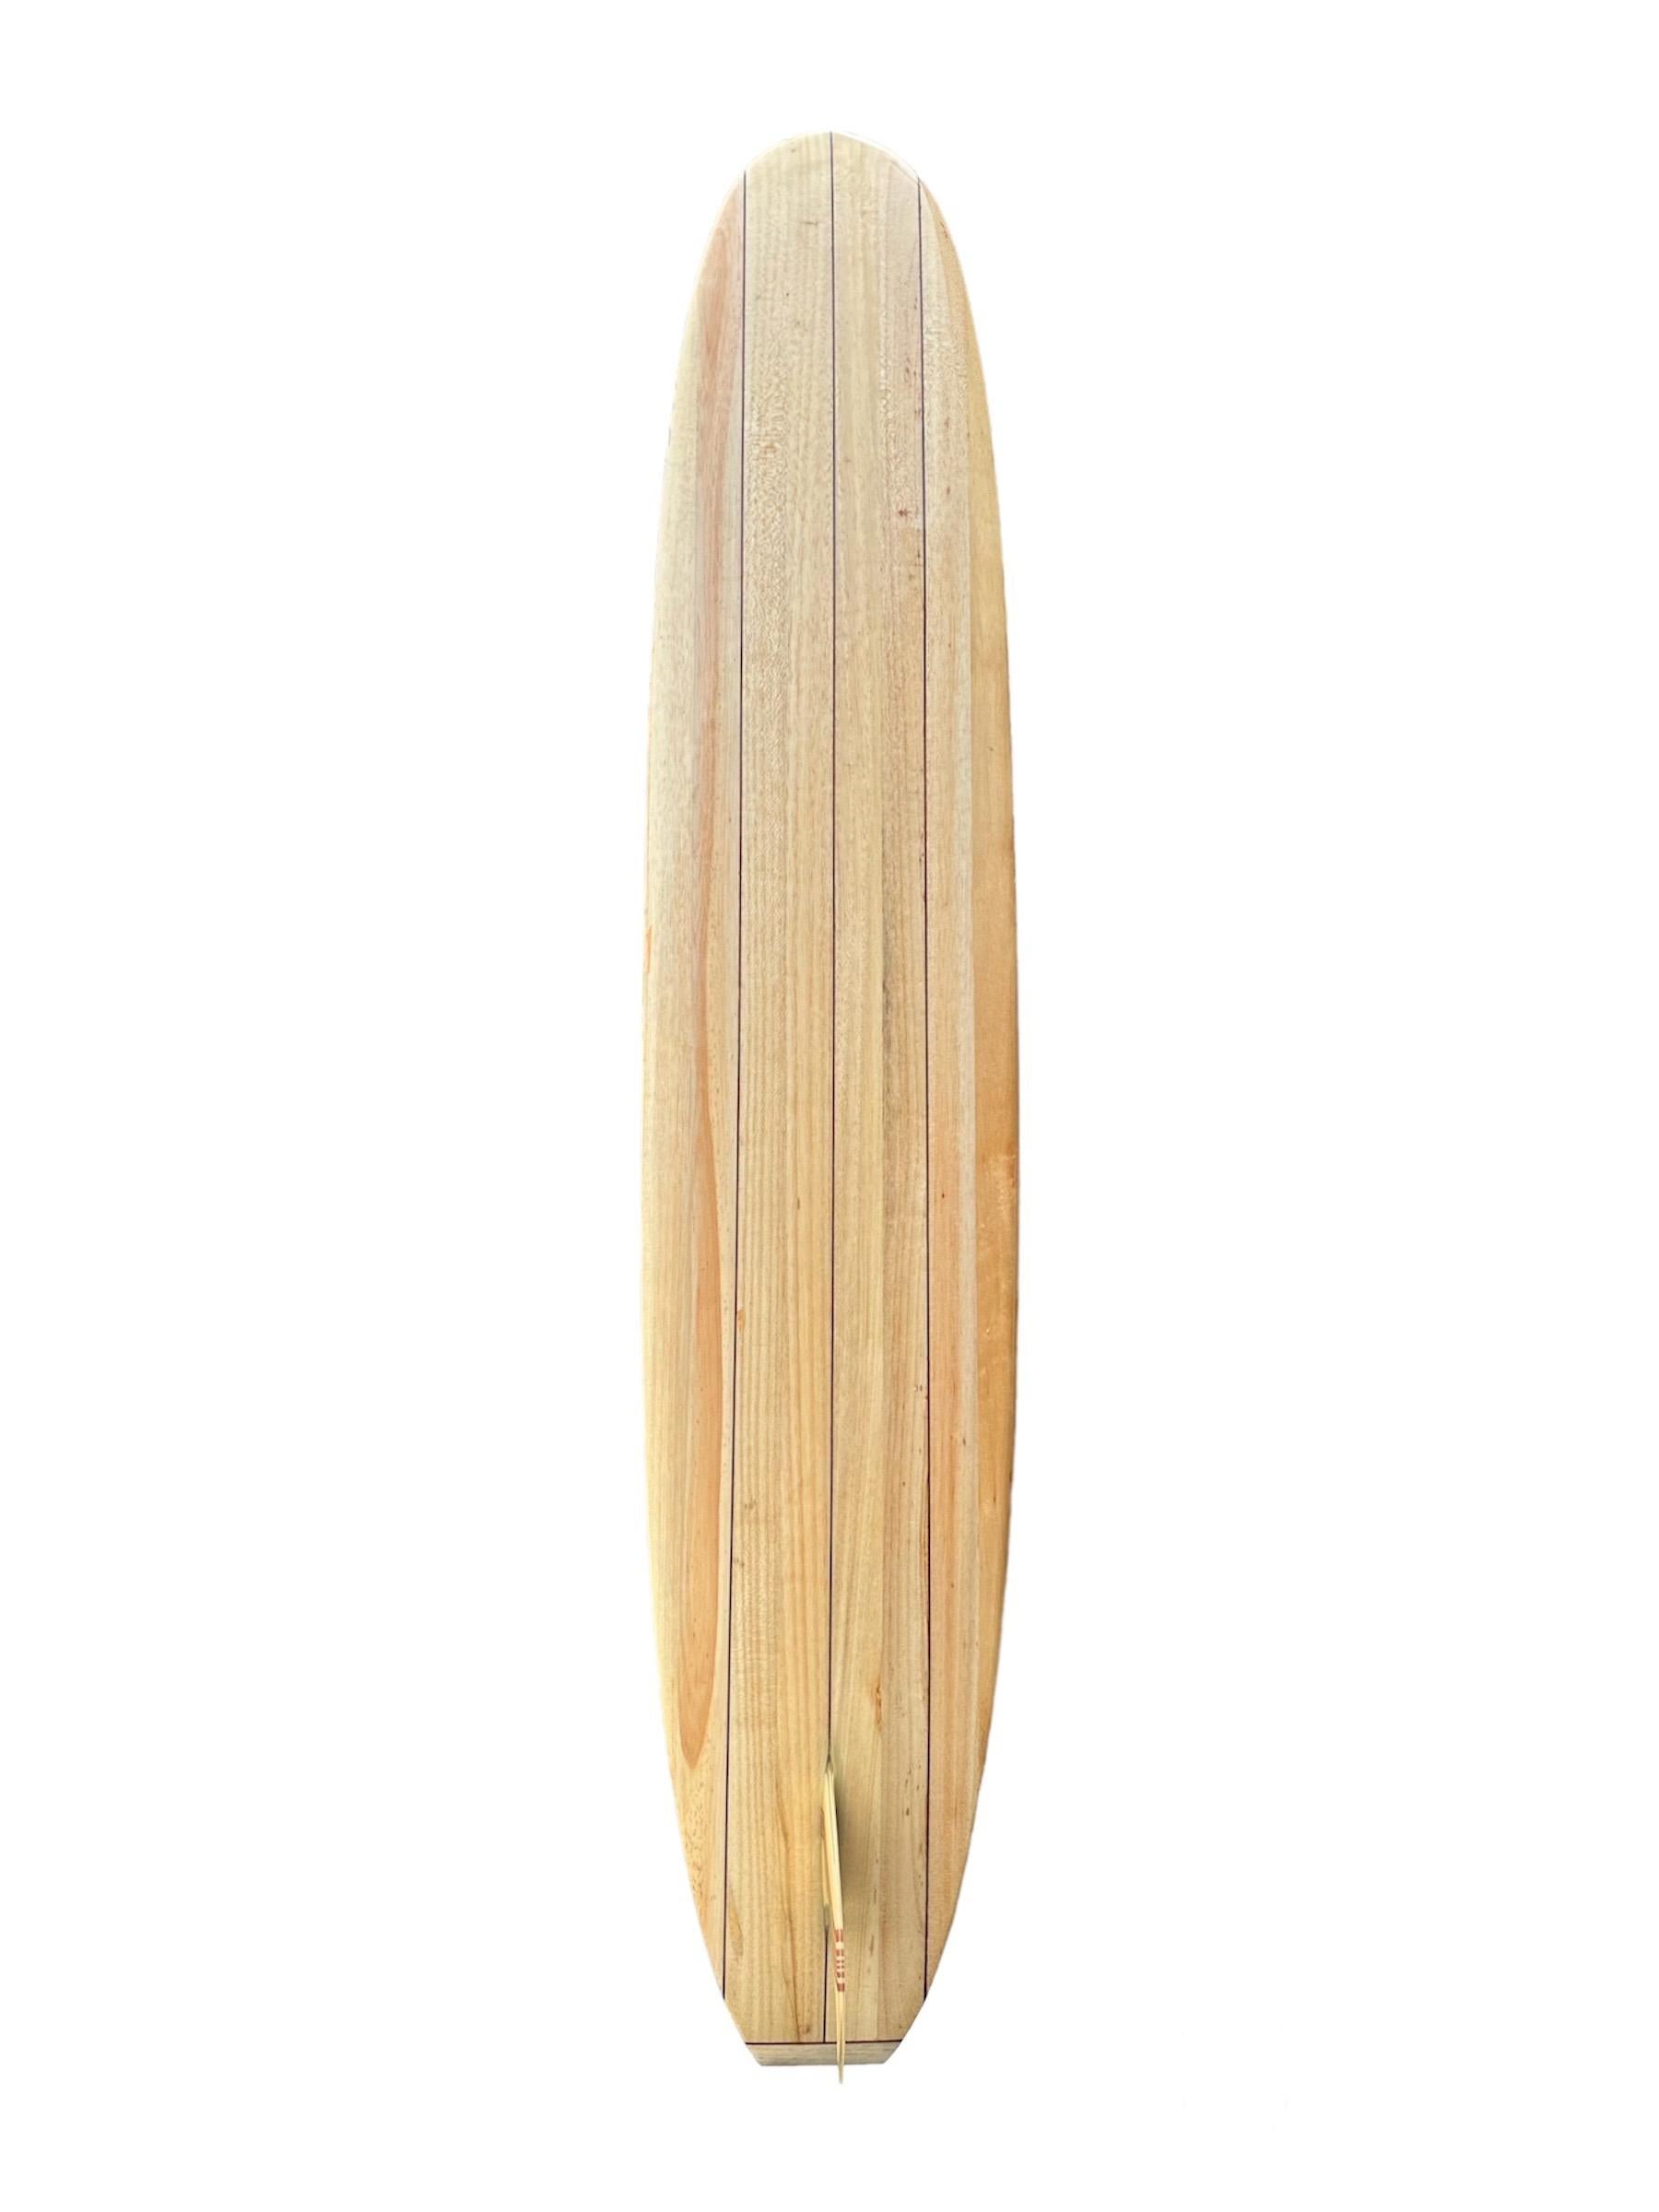 Marc Andreini shaped balsa wooden longboard. Features a classic longboard shape design with triple stringers and striking 13 piece wood fin. A remarkable example of a beautifully hand crafted balsawood longboard.